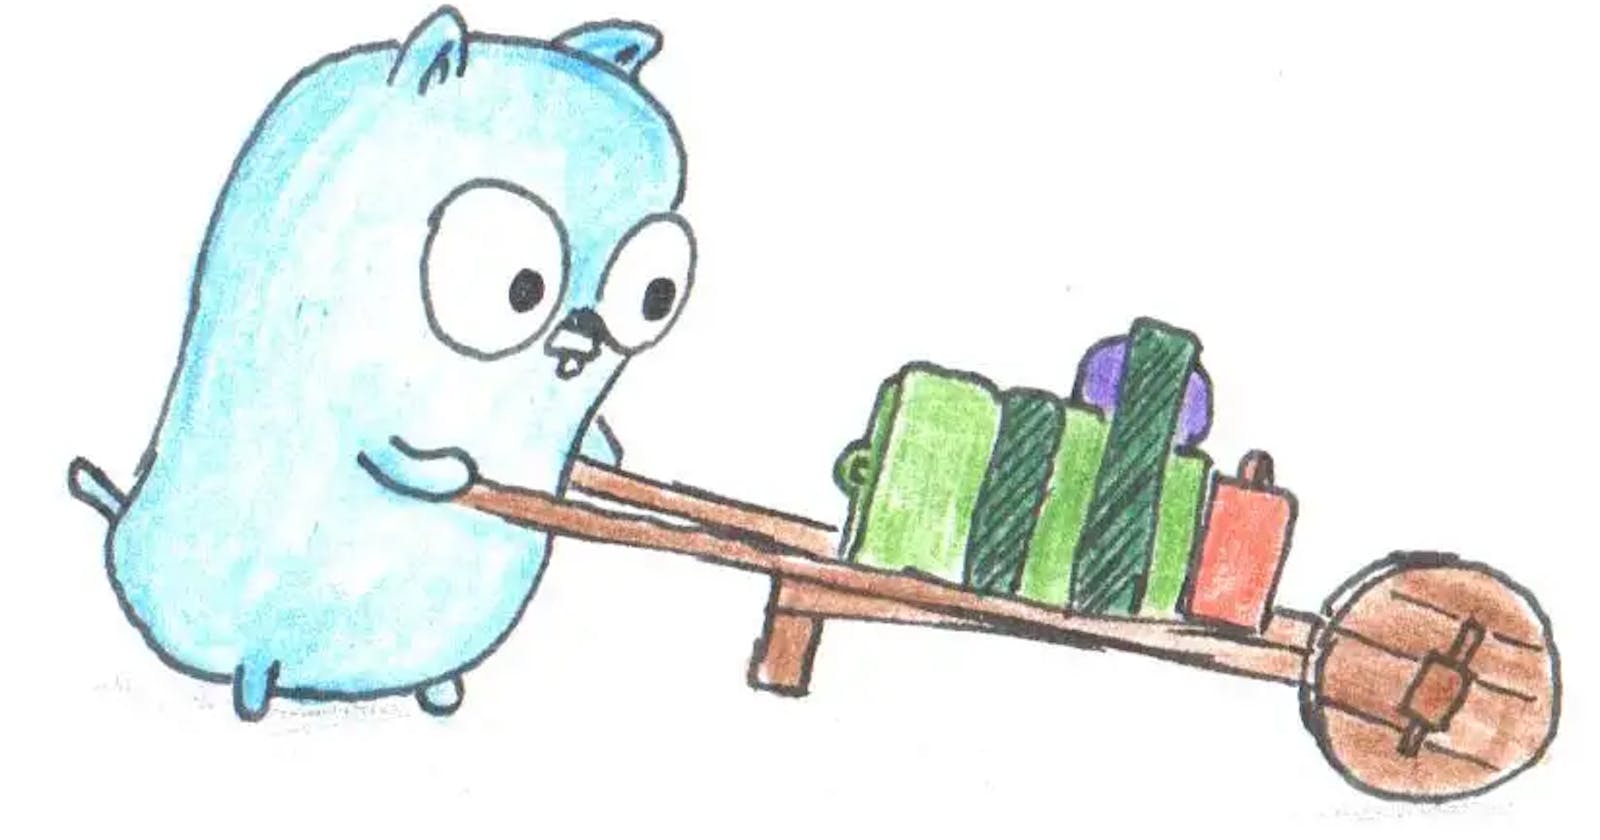 Implementing OOP Concepts in Golang